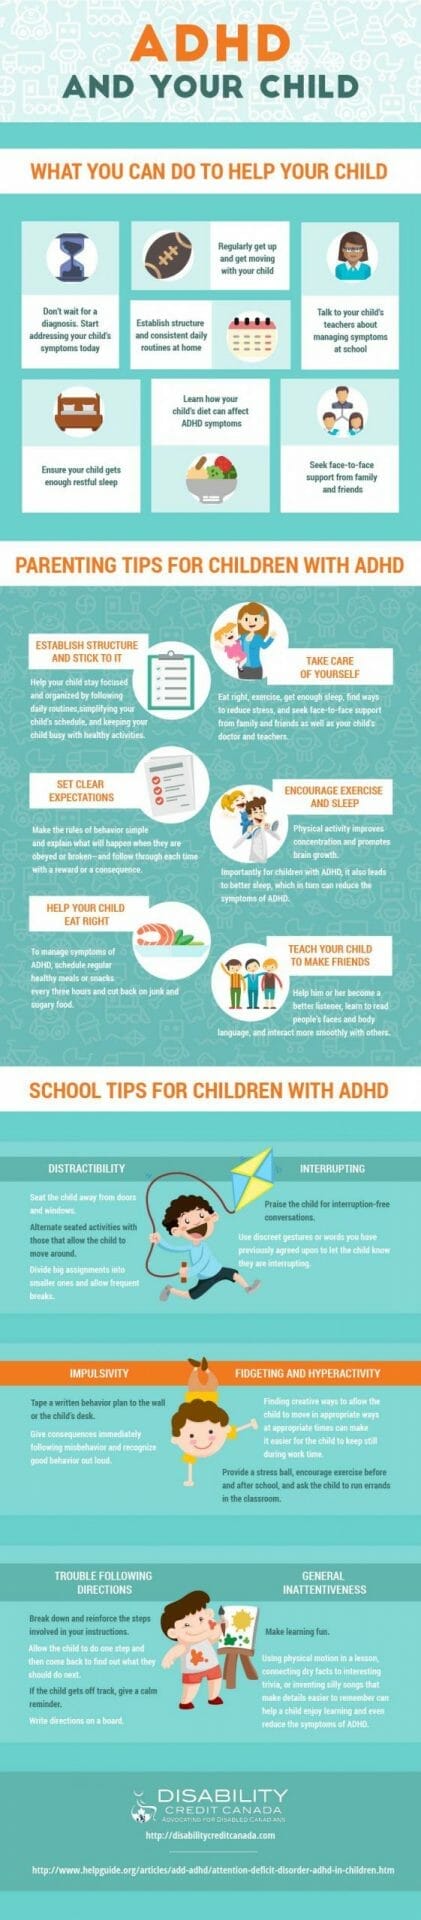 ADHD in Children and tips and tricks for parents and teachers